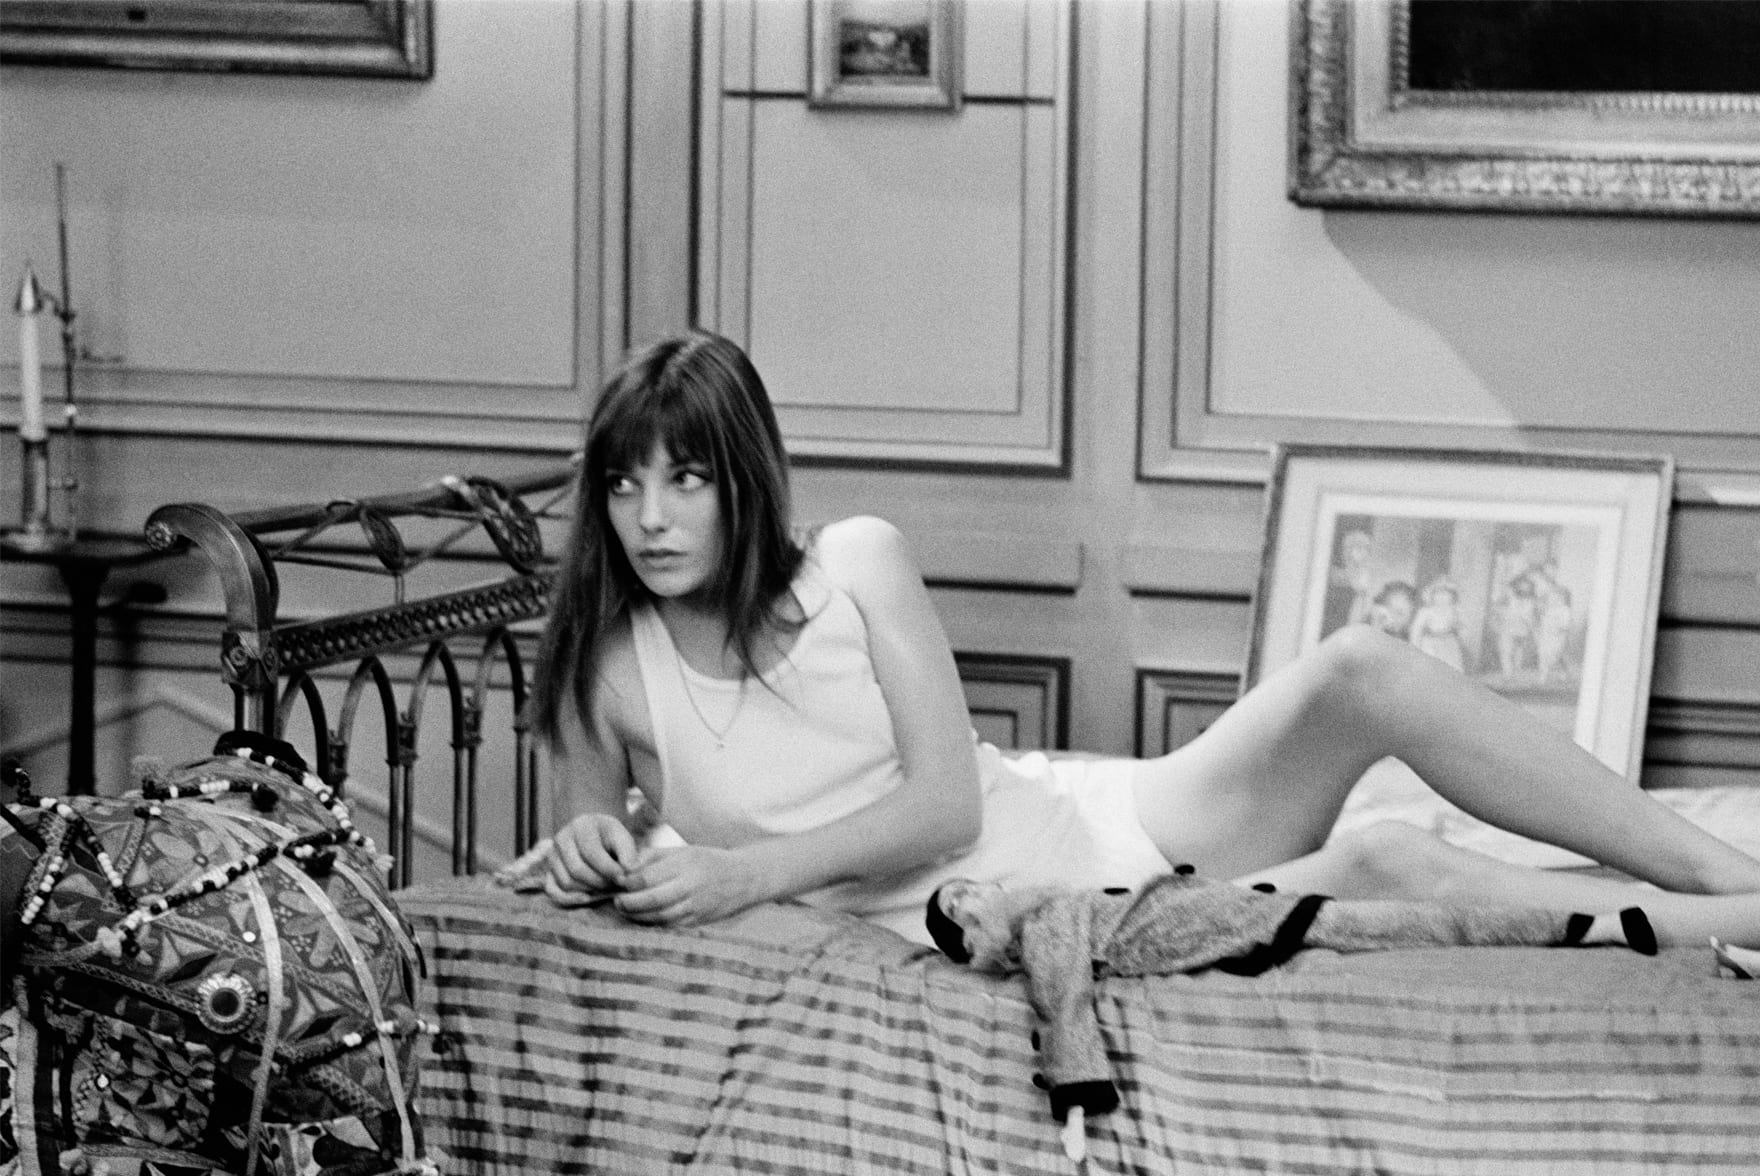 Jane Birkin, from the 70s to the 80s. Many shots from the movie